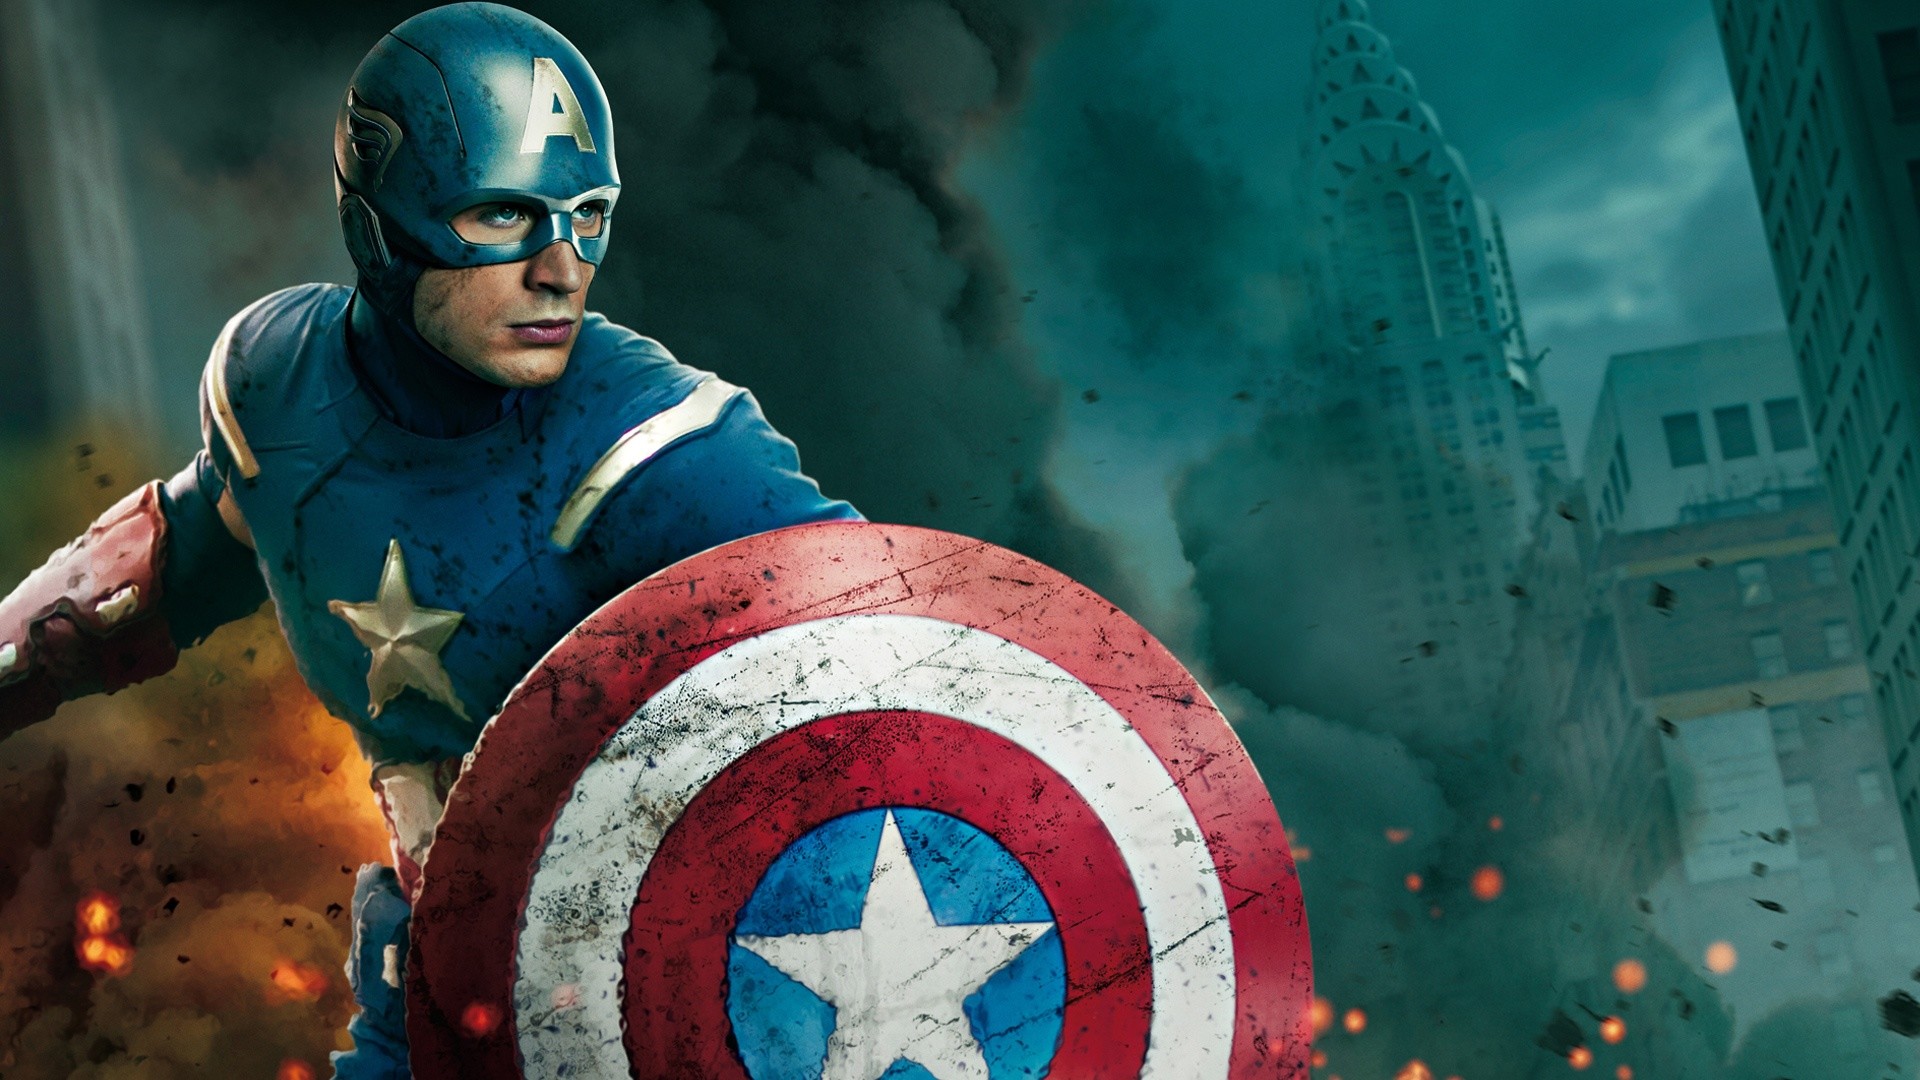 1920x1080 The Avengers Captain America Wallpapers Hd 1080p HD Wallpapers 